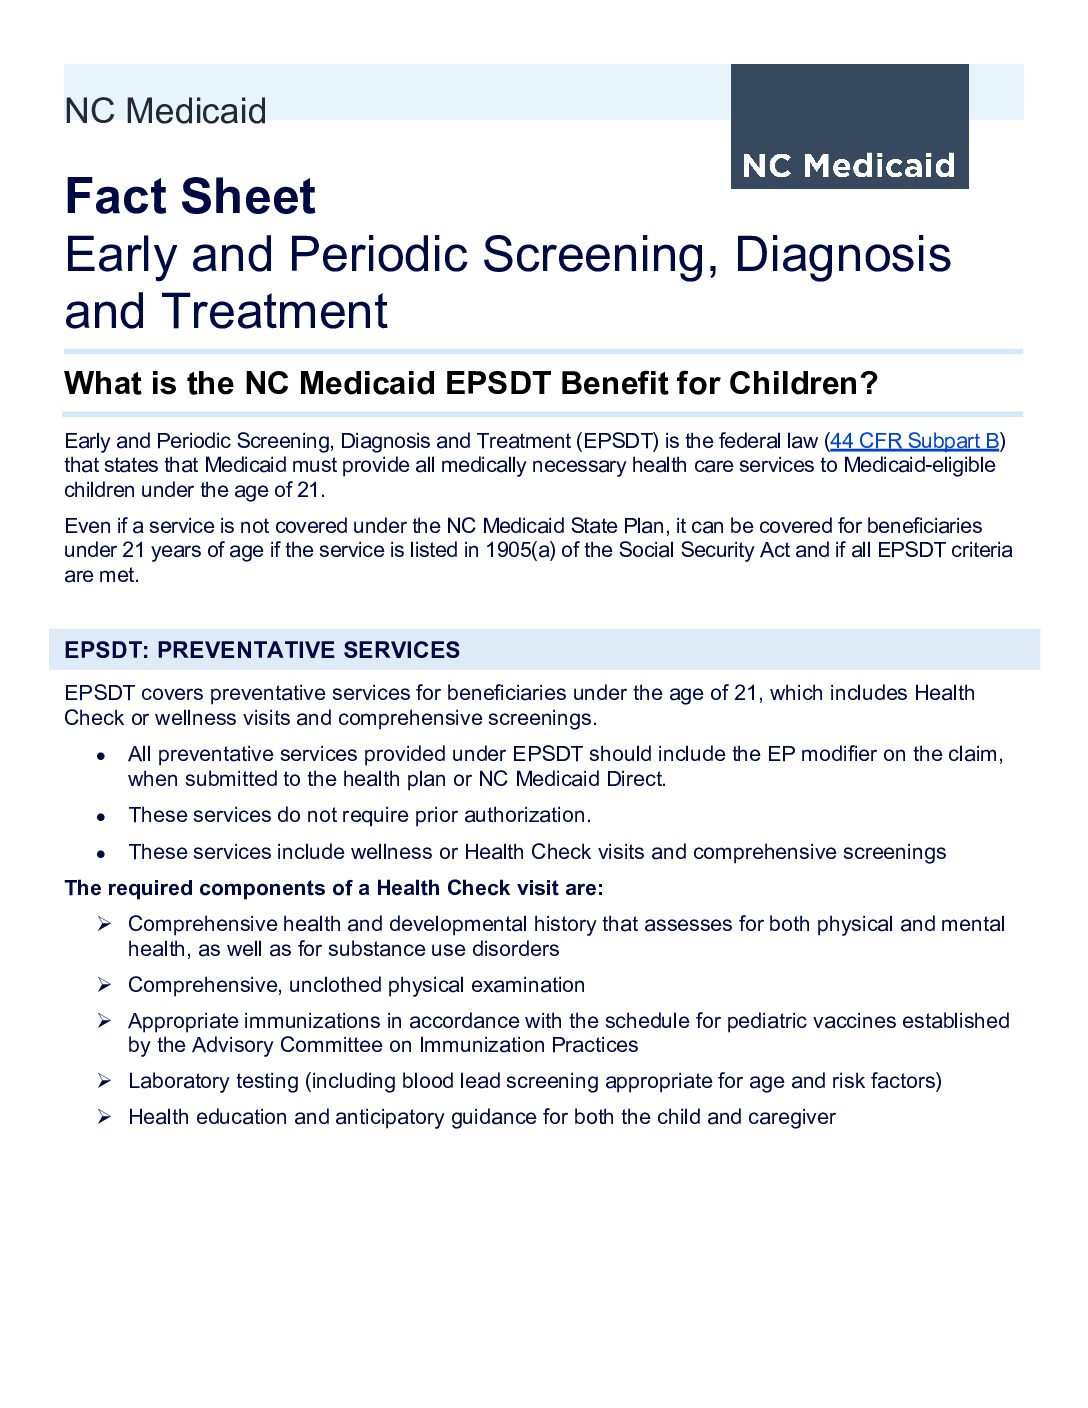 Early and Periodic Screening, Diagnosis and Treatment